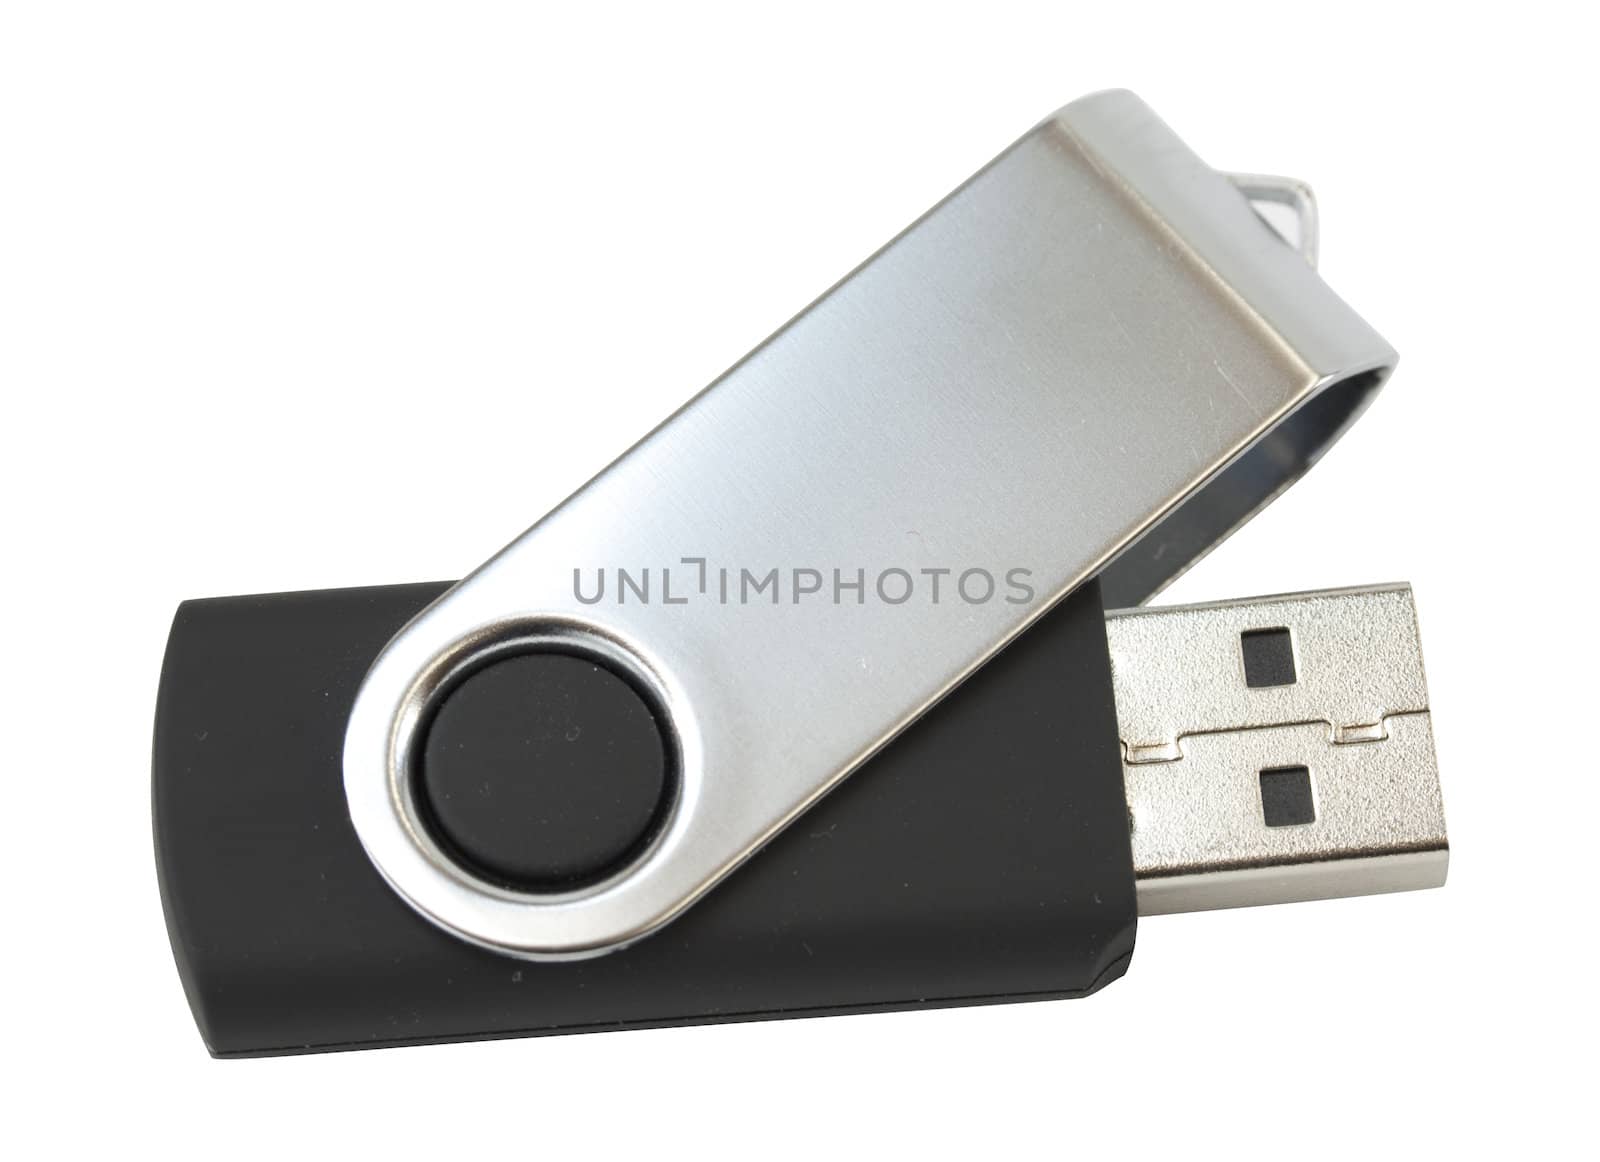 Black and silver USB stick isolated on white background